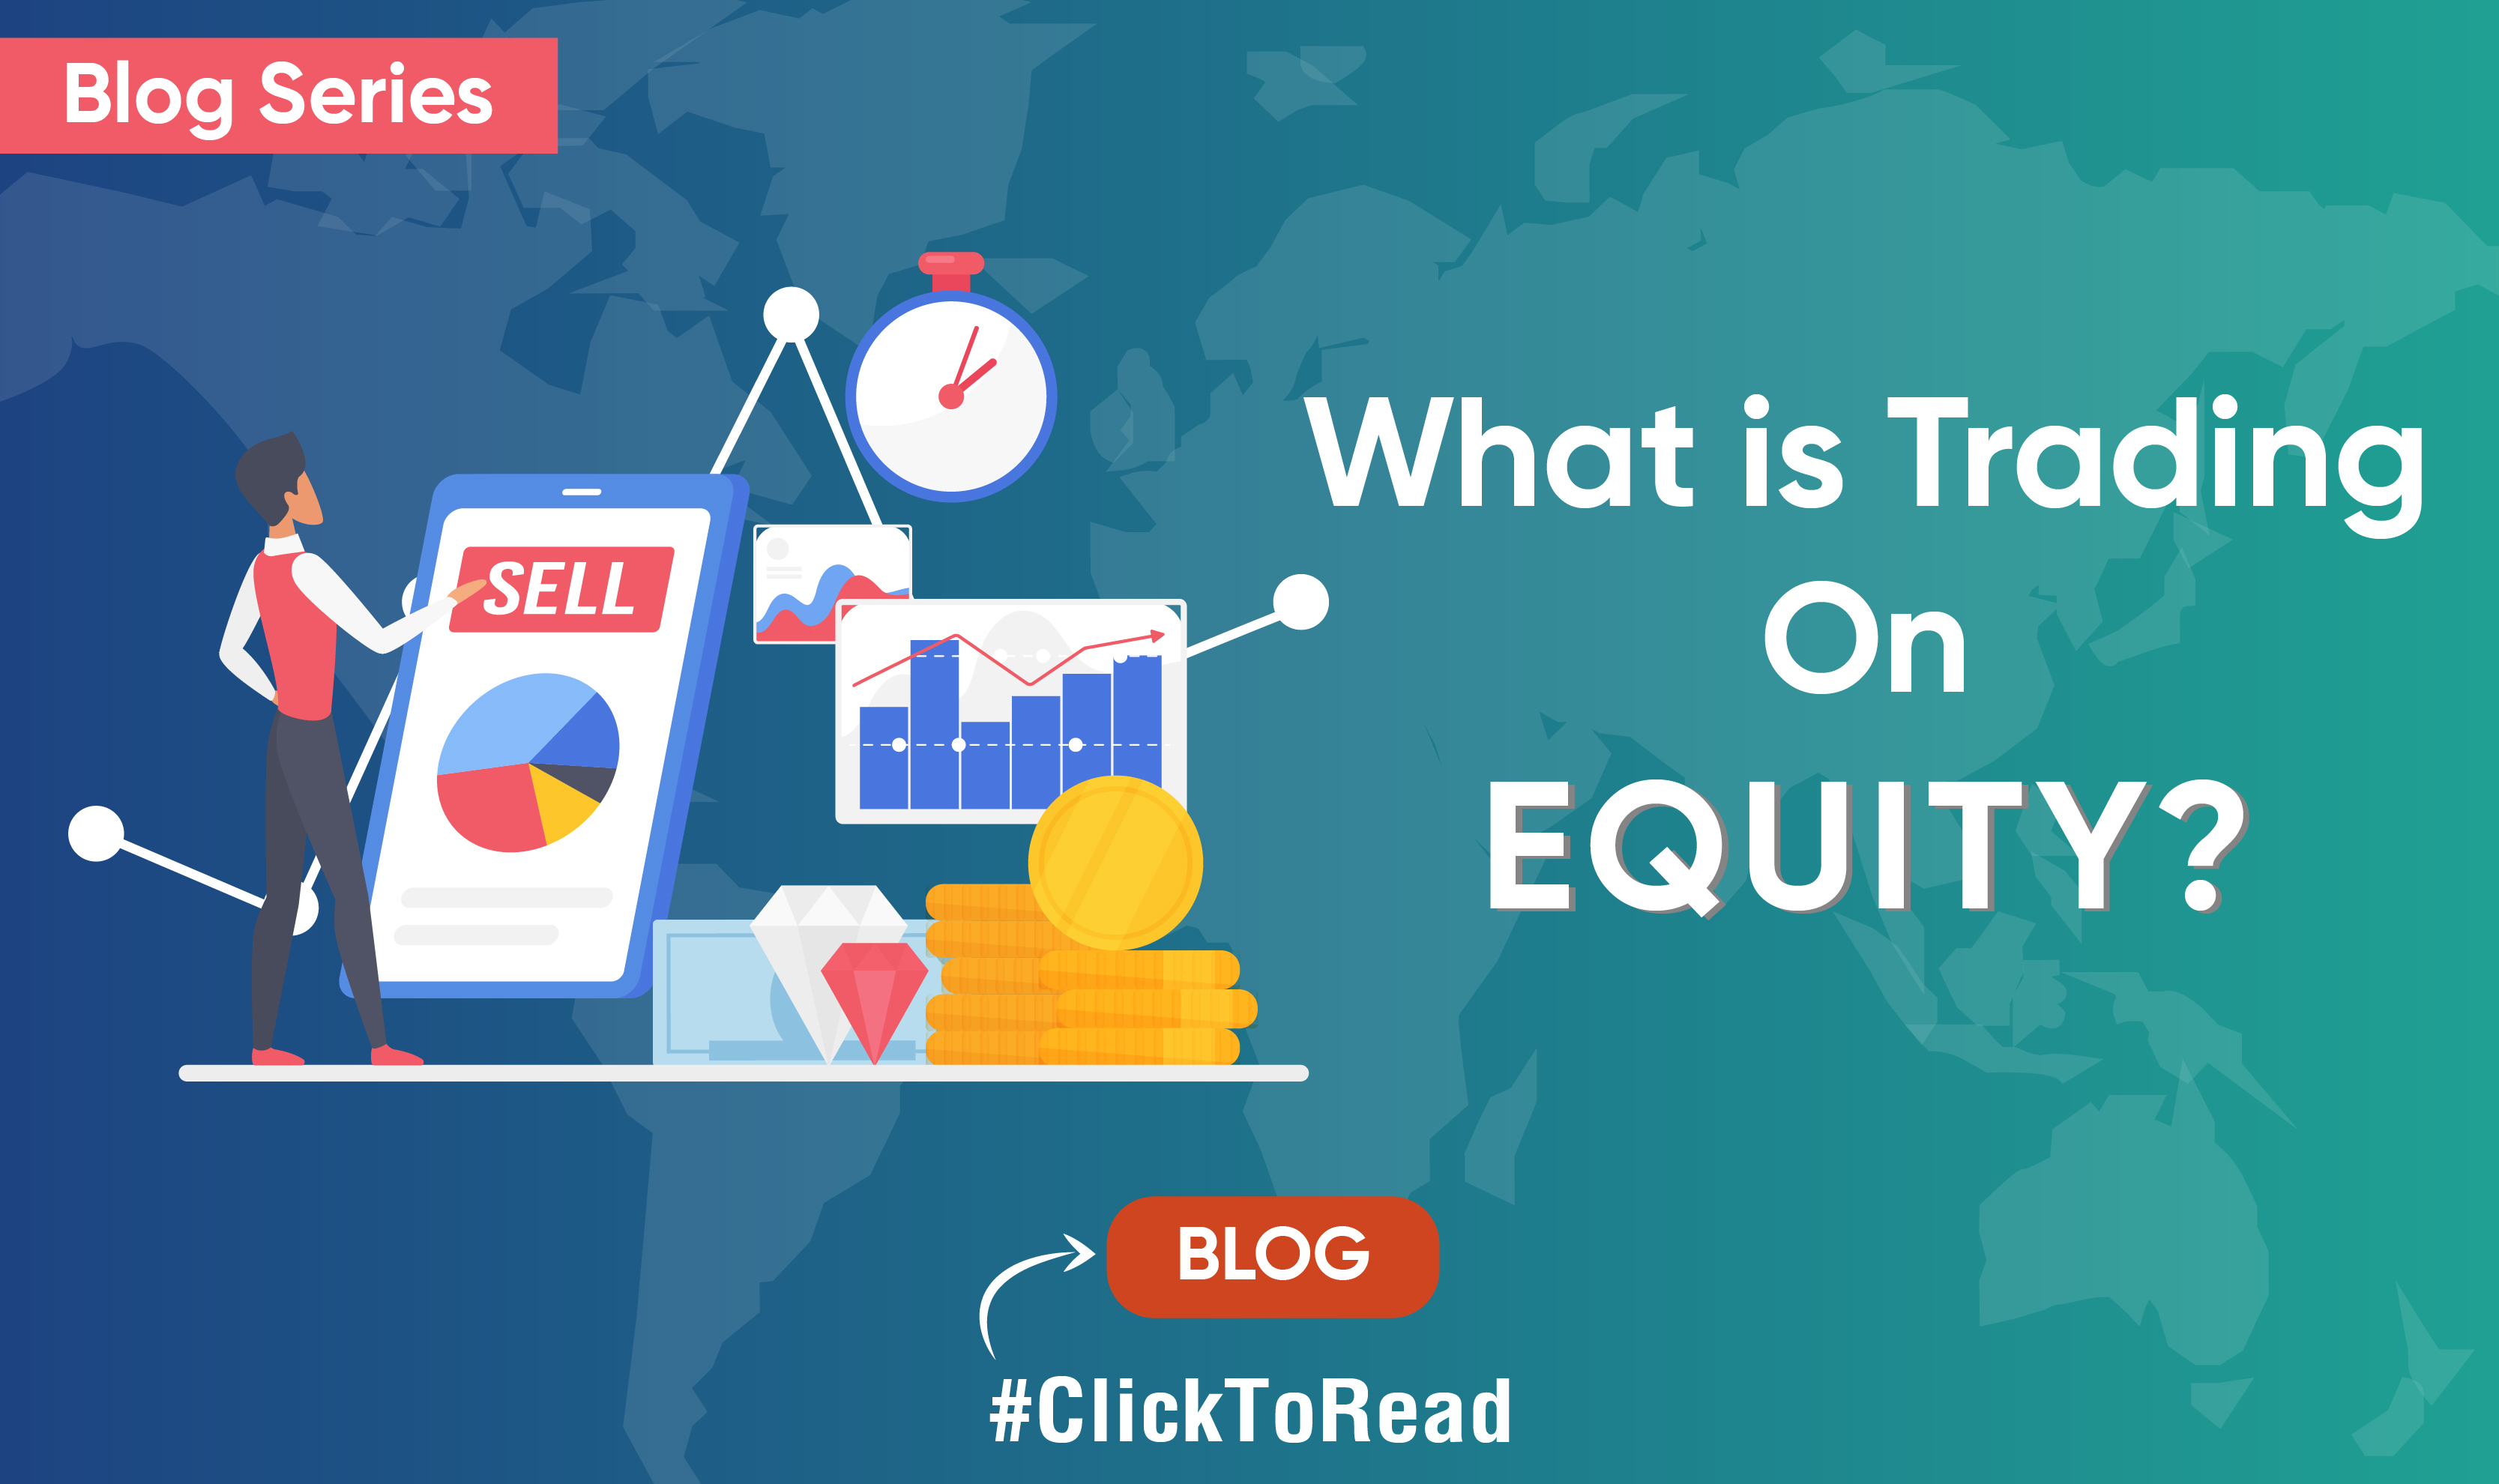 What is trading on equity?